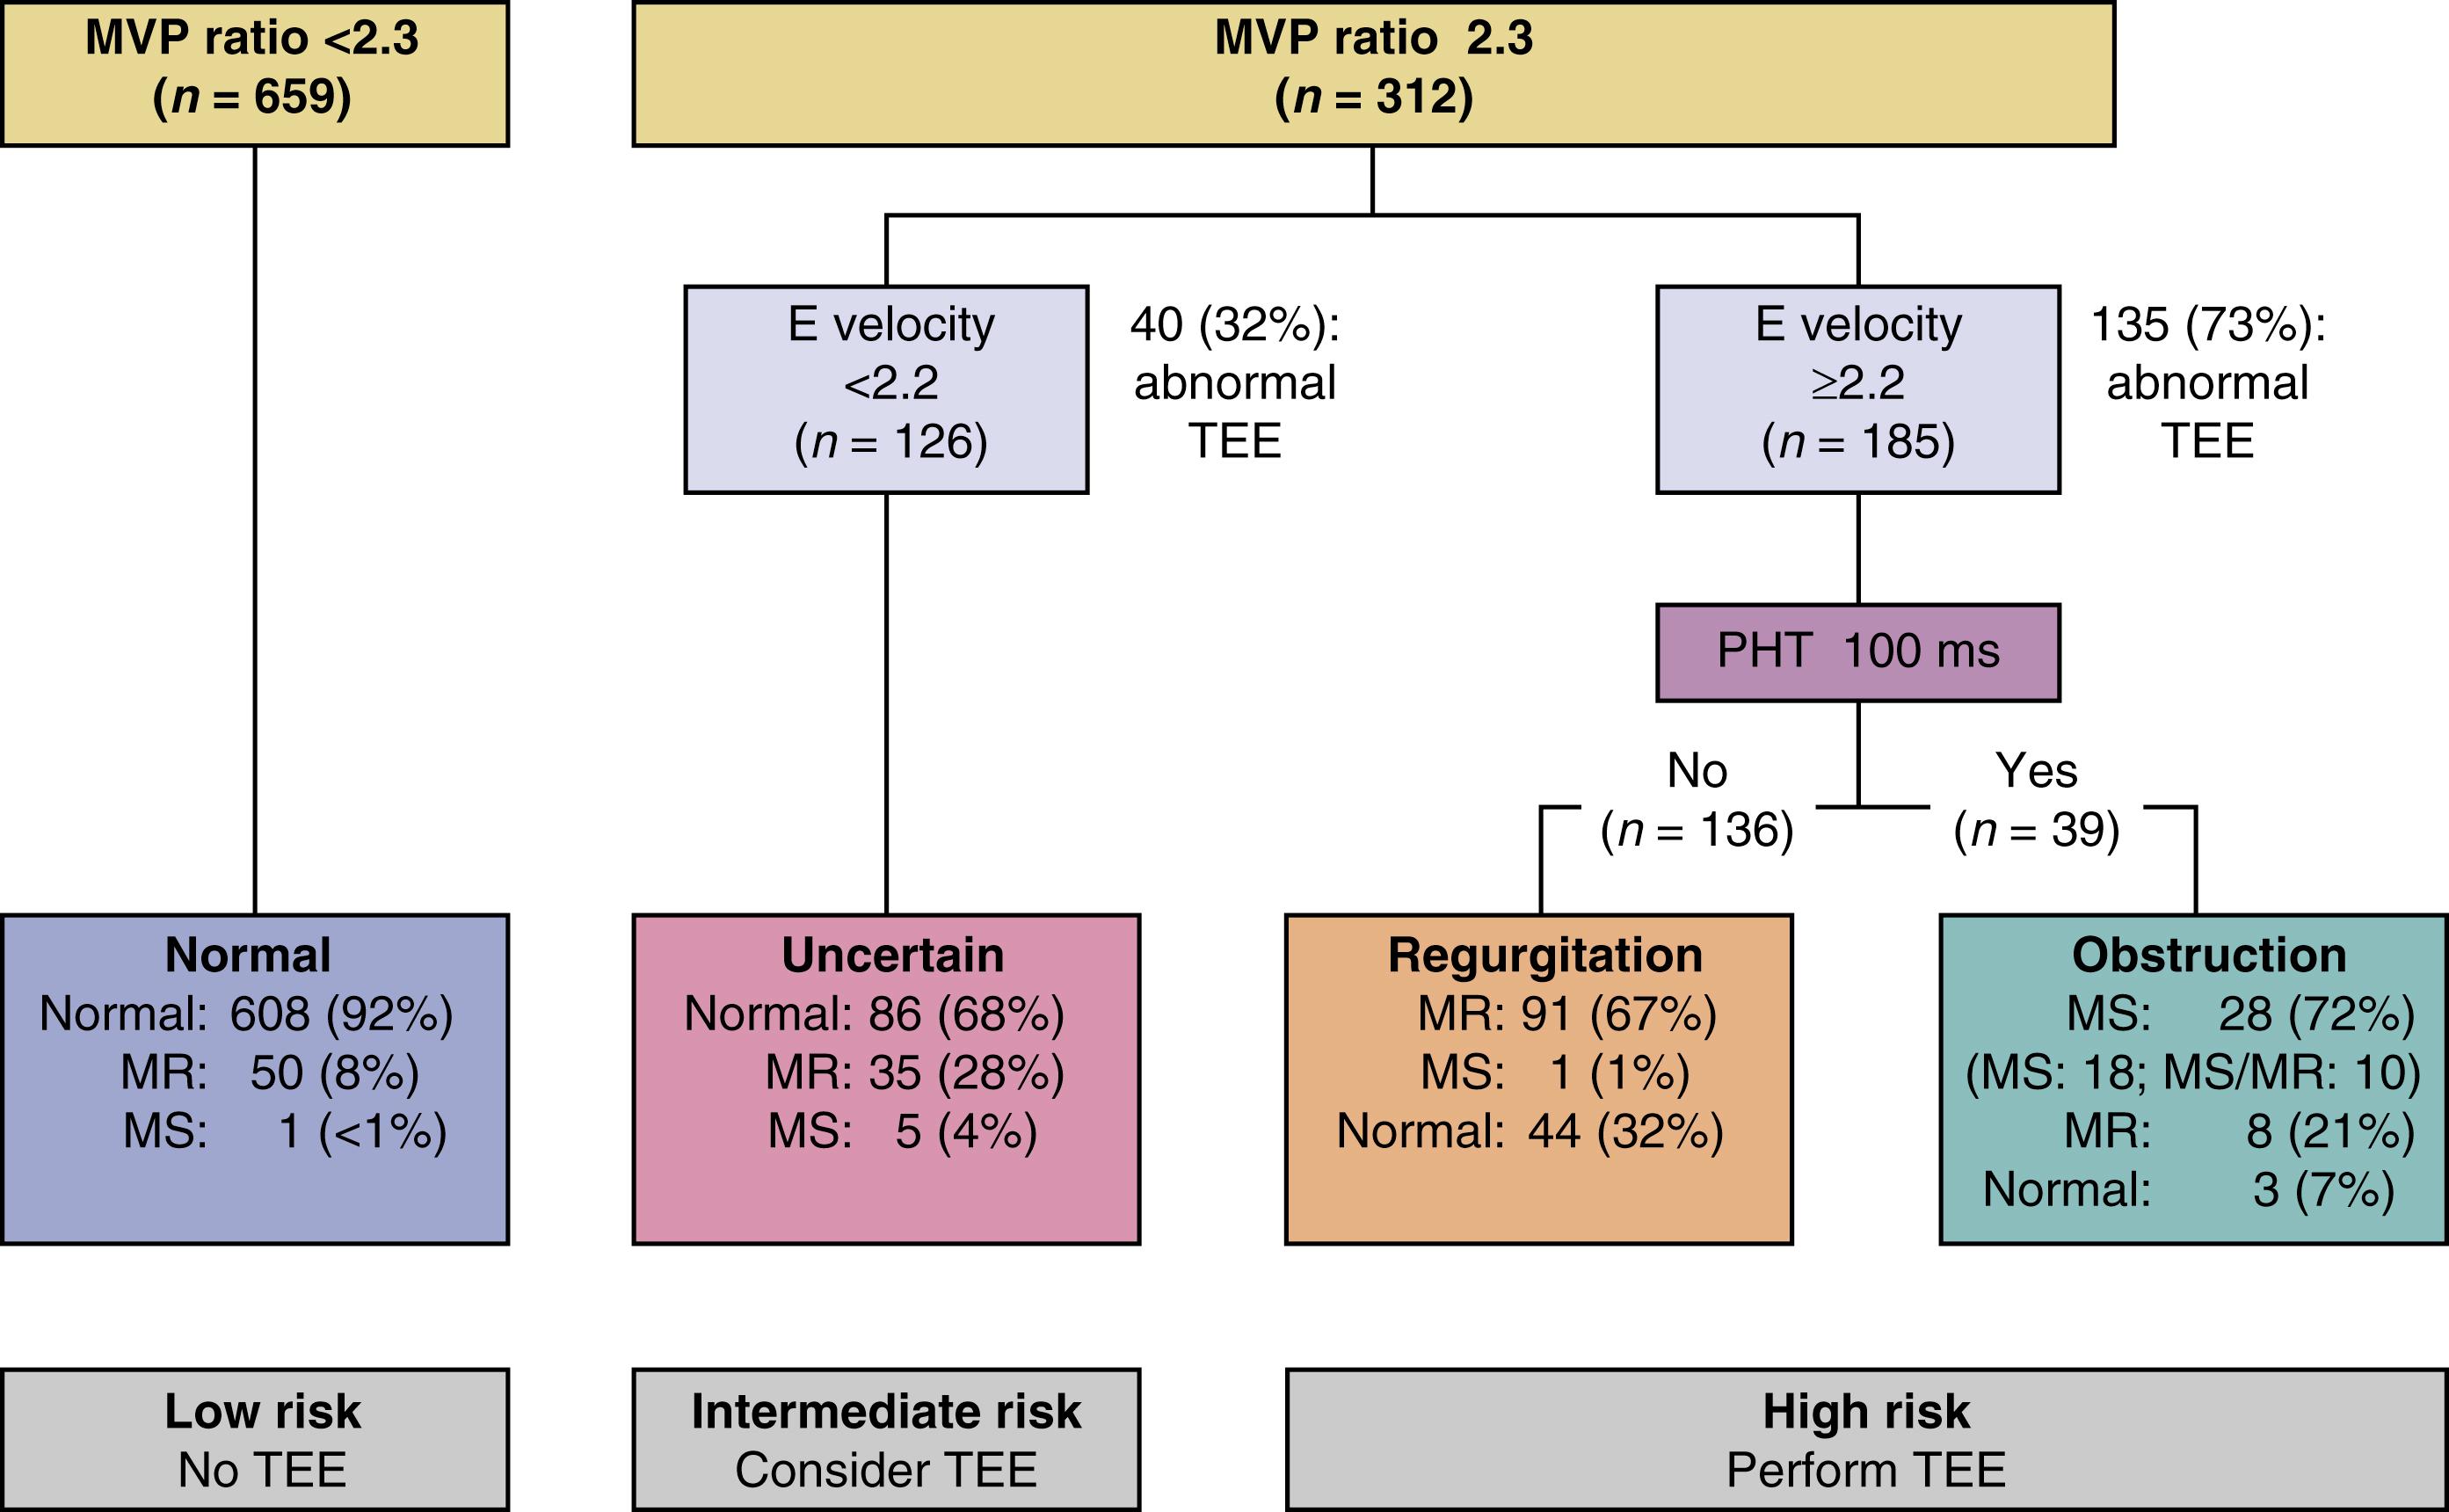 Figure 111.1, Clinical algorithm for the evaluation of mitral prostheses using the dimensionless velocity index (DVI), E velocity, and pressure halftime (PHT). In this study, DVI is referred to as the mitral valve prosthesis ratio (MVP ratio). A normal DVI is strongly predictive of normal mitral prosthetic valve function. Conversely, patients with an elevated DVI in combination with elevated E velocity have a high likelihood of dysfunction and in most cases should have further assessment with transesophageal echocardiography (TEE). PHT allows discrimination between stenosis and regurgitation. MR, Mitral regurgitation; MS, mitral stenosis